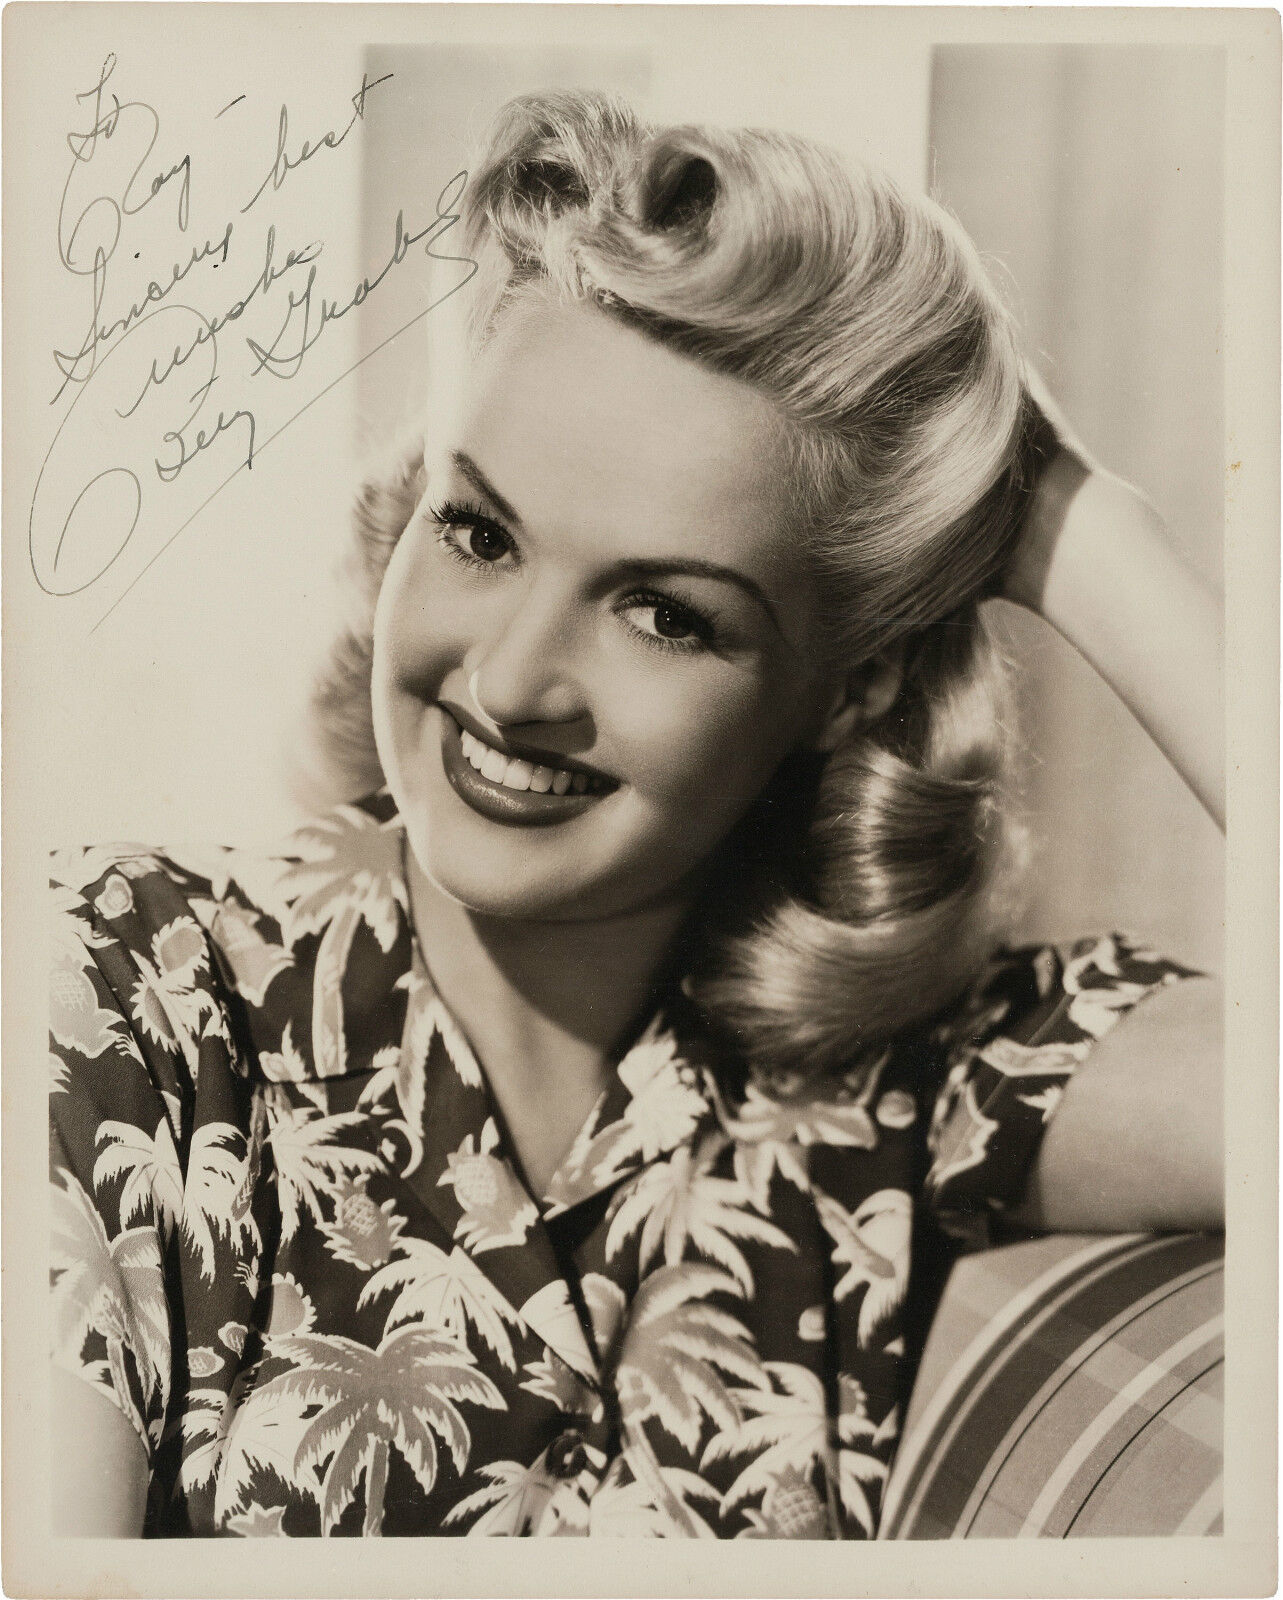 BETTY GRABLE Signed Photo Poster paintinggraph - Gorgeous Film Actress - preprint